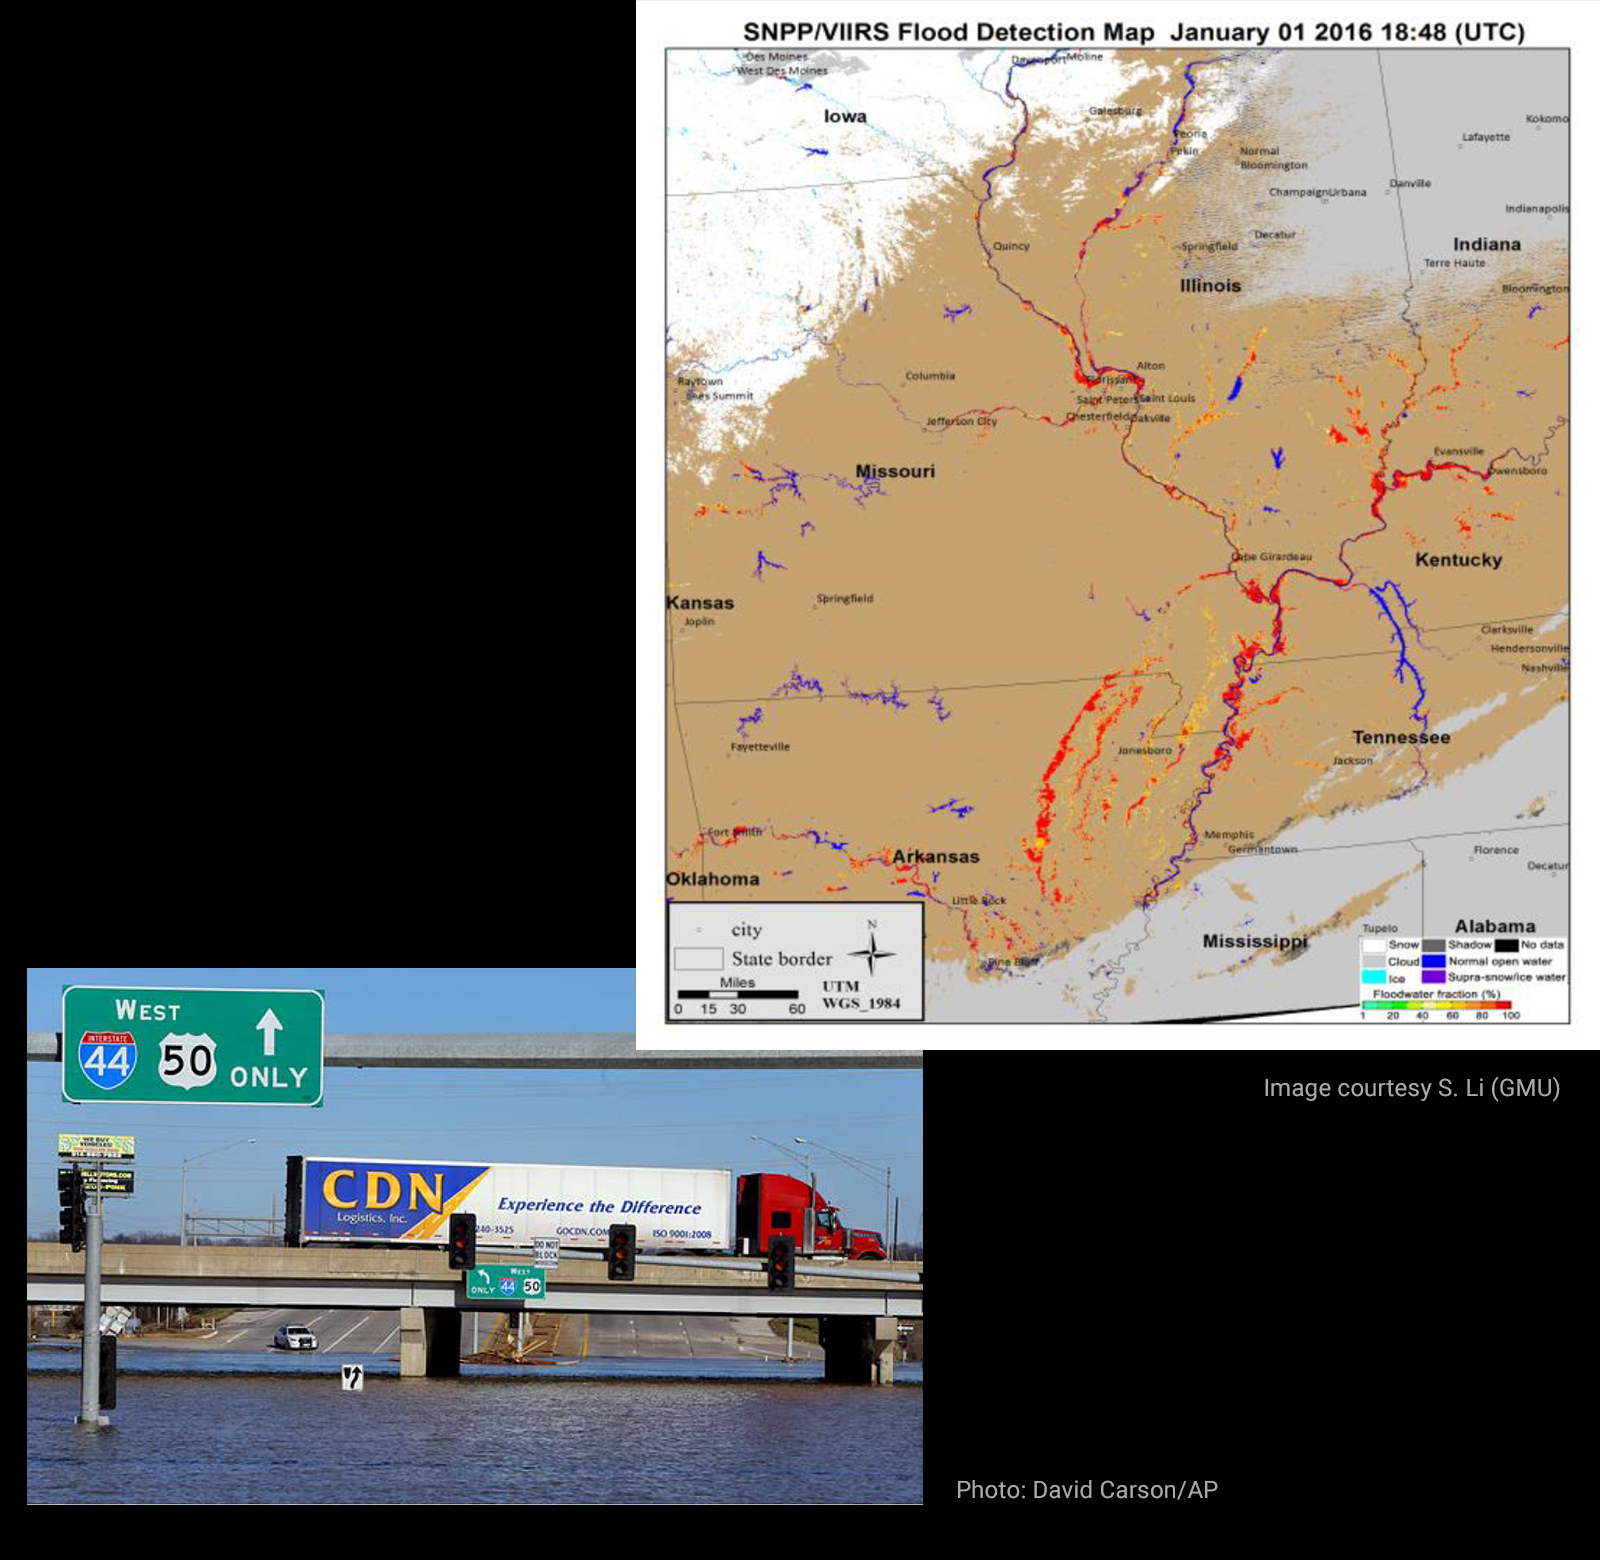 A composite image; at top, a flood detection map of the Mississippi River Valley, with floodwaters indicated in red and yellow. At bottom, a photo showing flood waters rising high on an overpass.